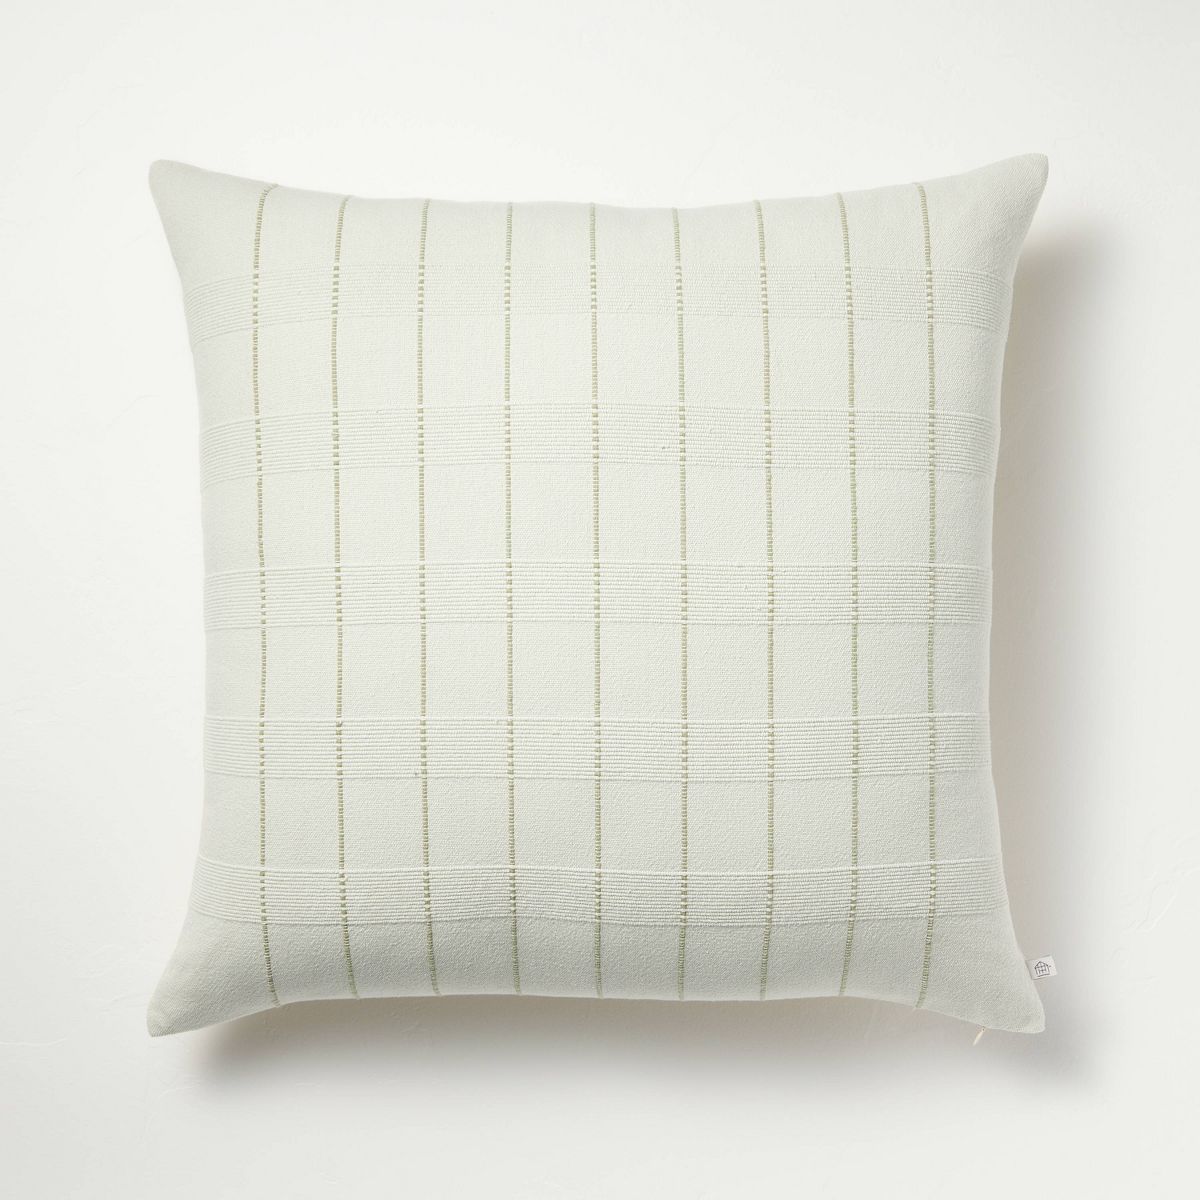 24"x24" Textural Multi-Stripe Square Throw Pillow Light Green - Hearth & Hand™ with Magnolia | Target